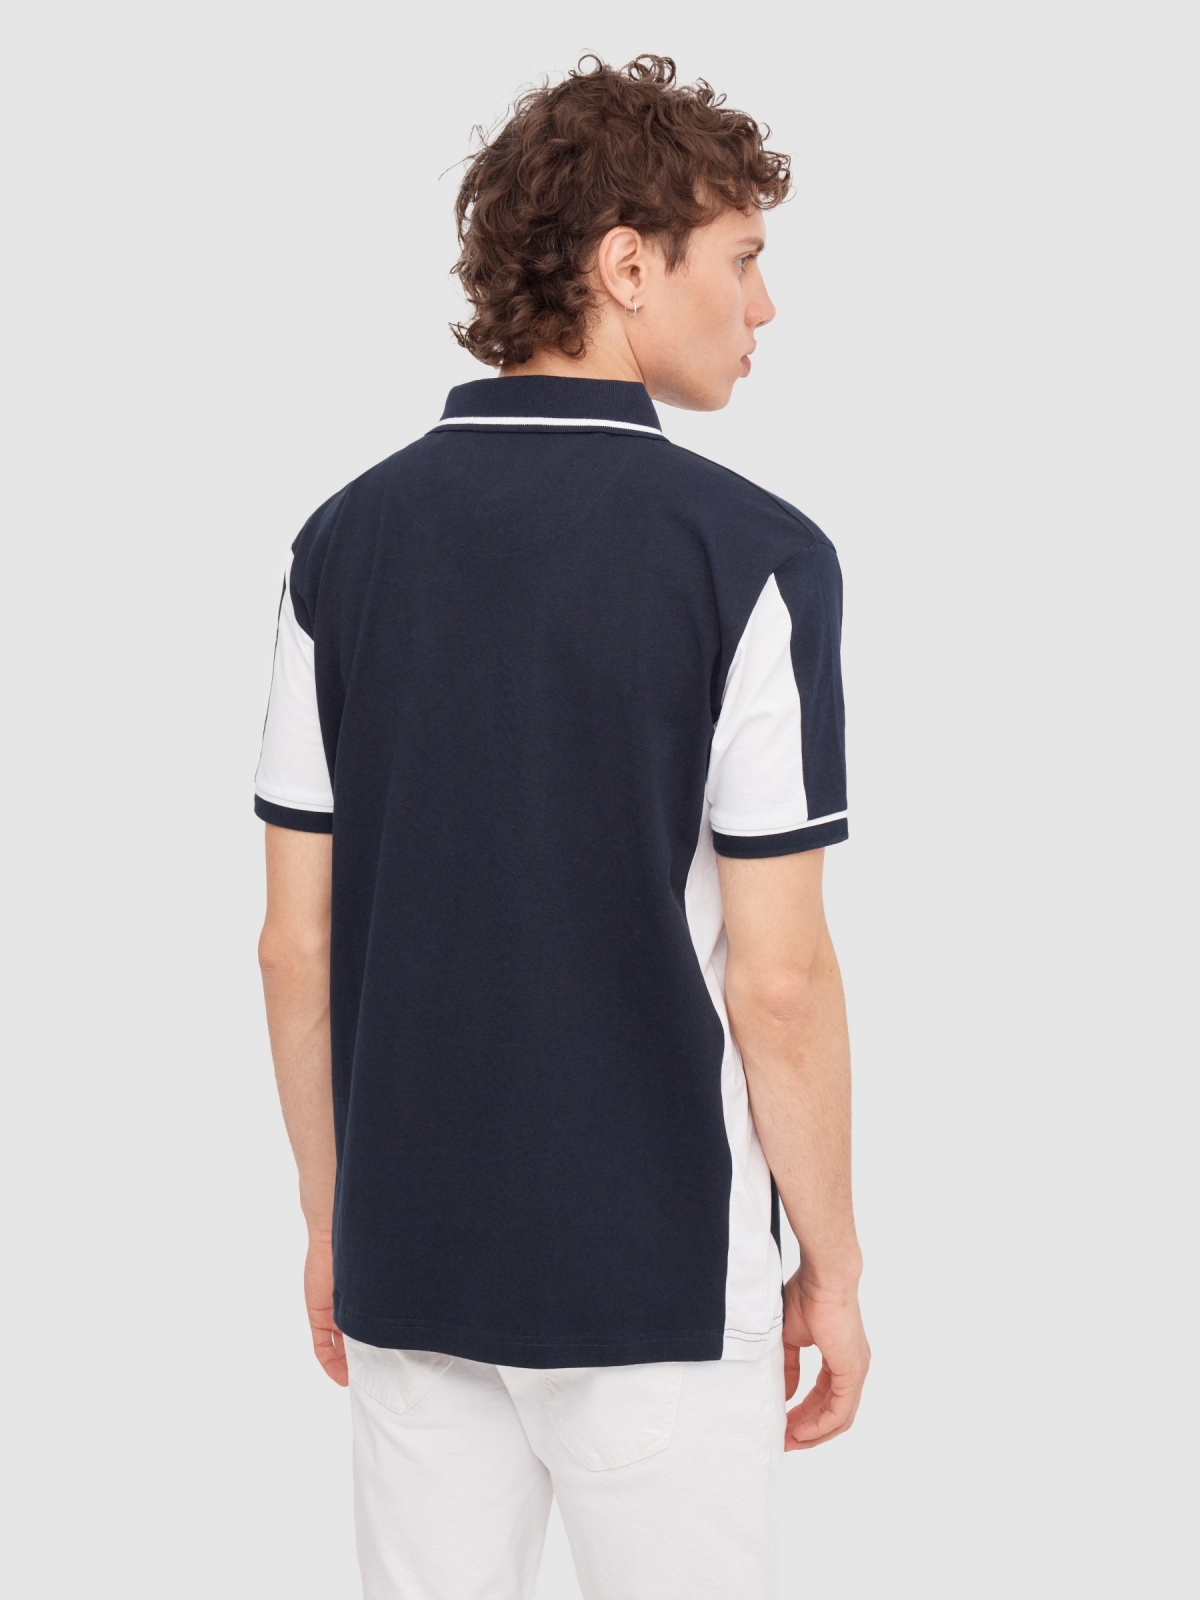 Sports polo shirt navy middle back view